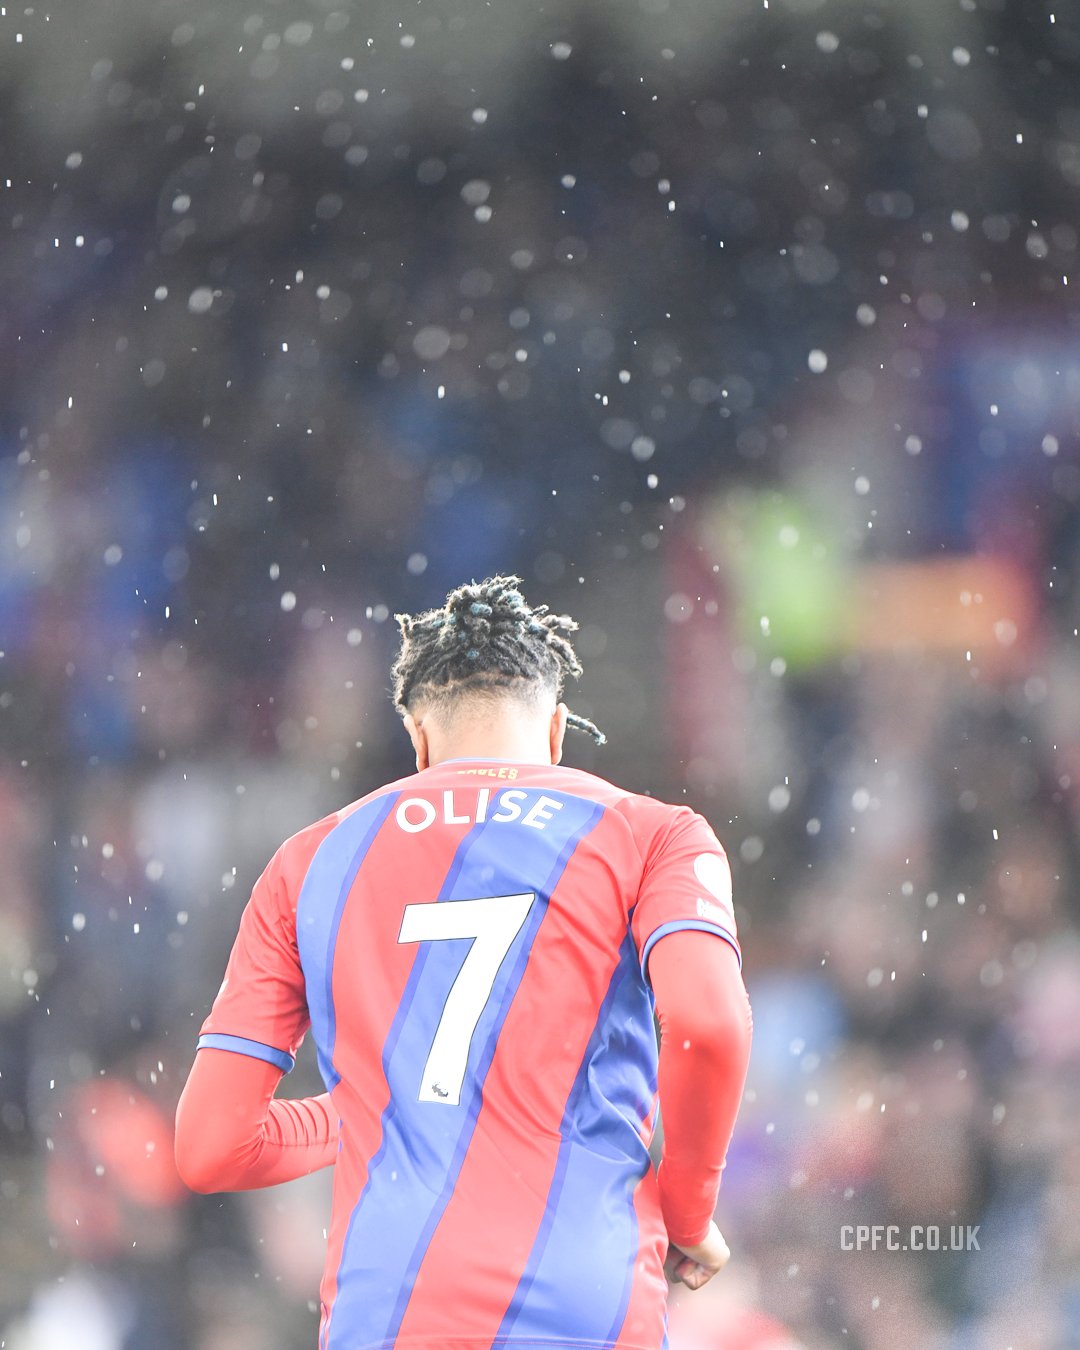 Crystal Palace F.C. on Twitter: This is a Michael Olise appreciation tweet. https://t.co/UQsEo5w1Yf / Twitter